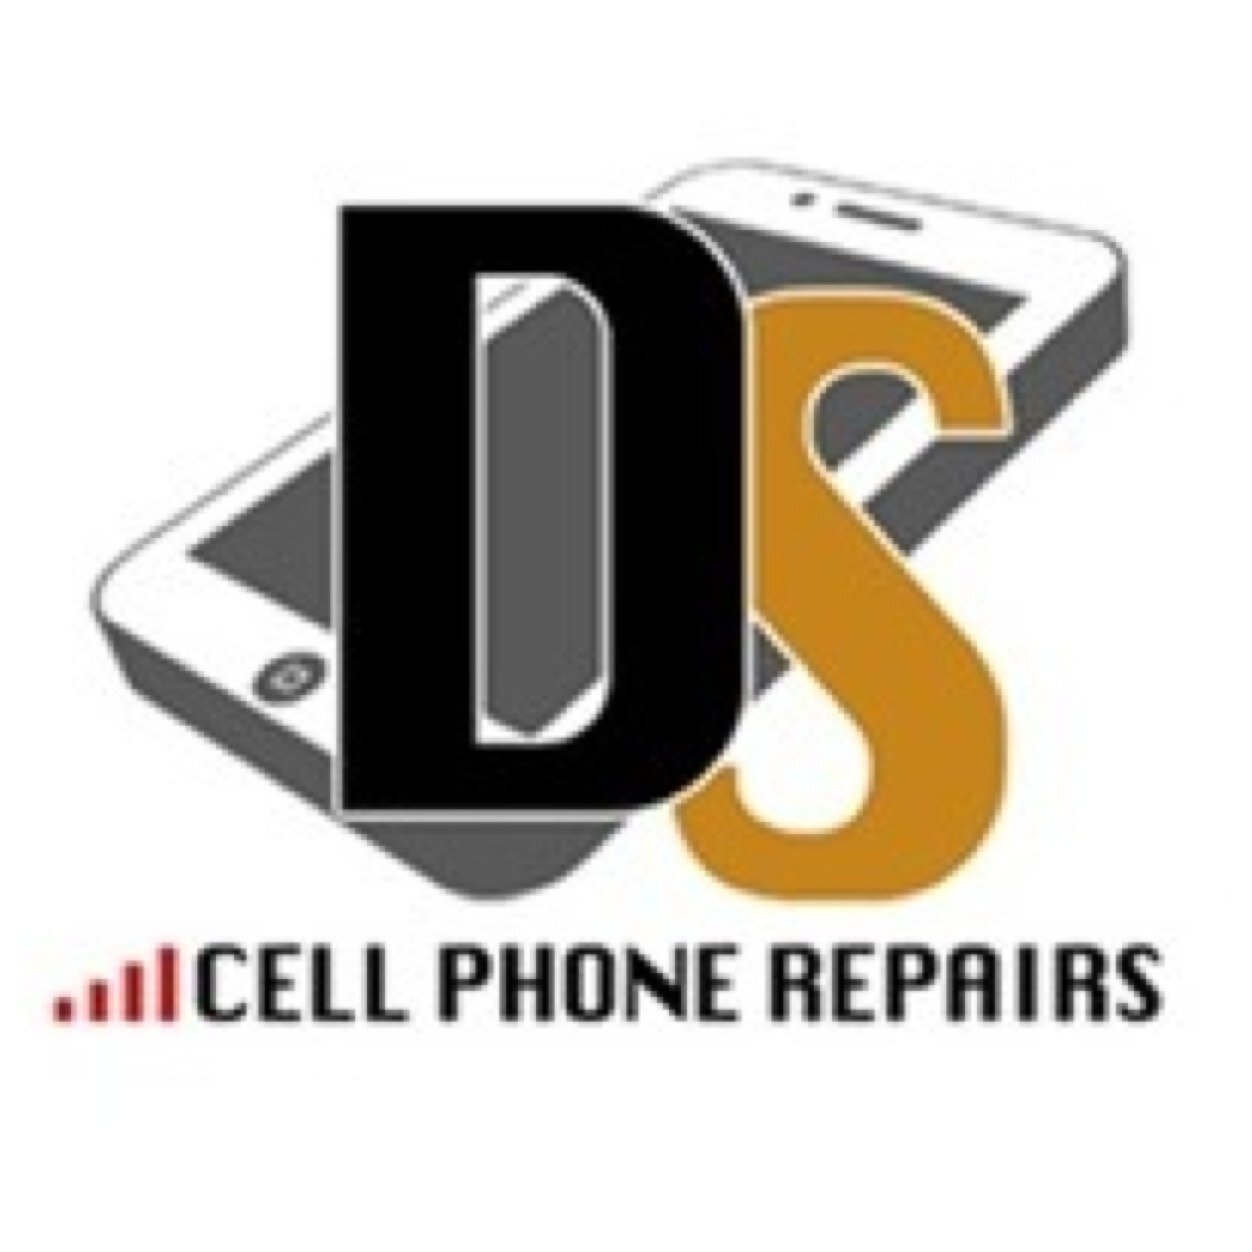 Professional Repair Technician for iPhone/iPod/iPad Samsung iMac Pc and much more call or text 289-808-5587 or email me at info@MobileiRepairs.com